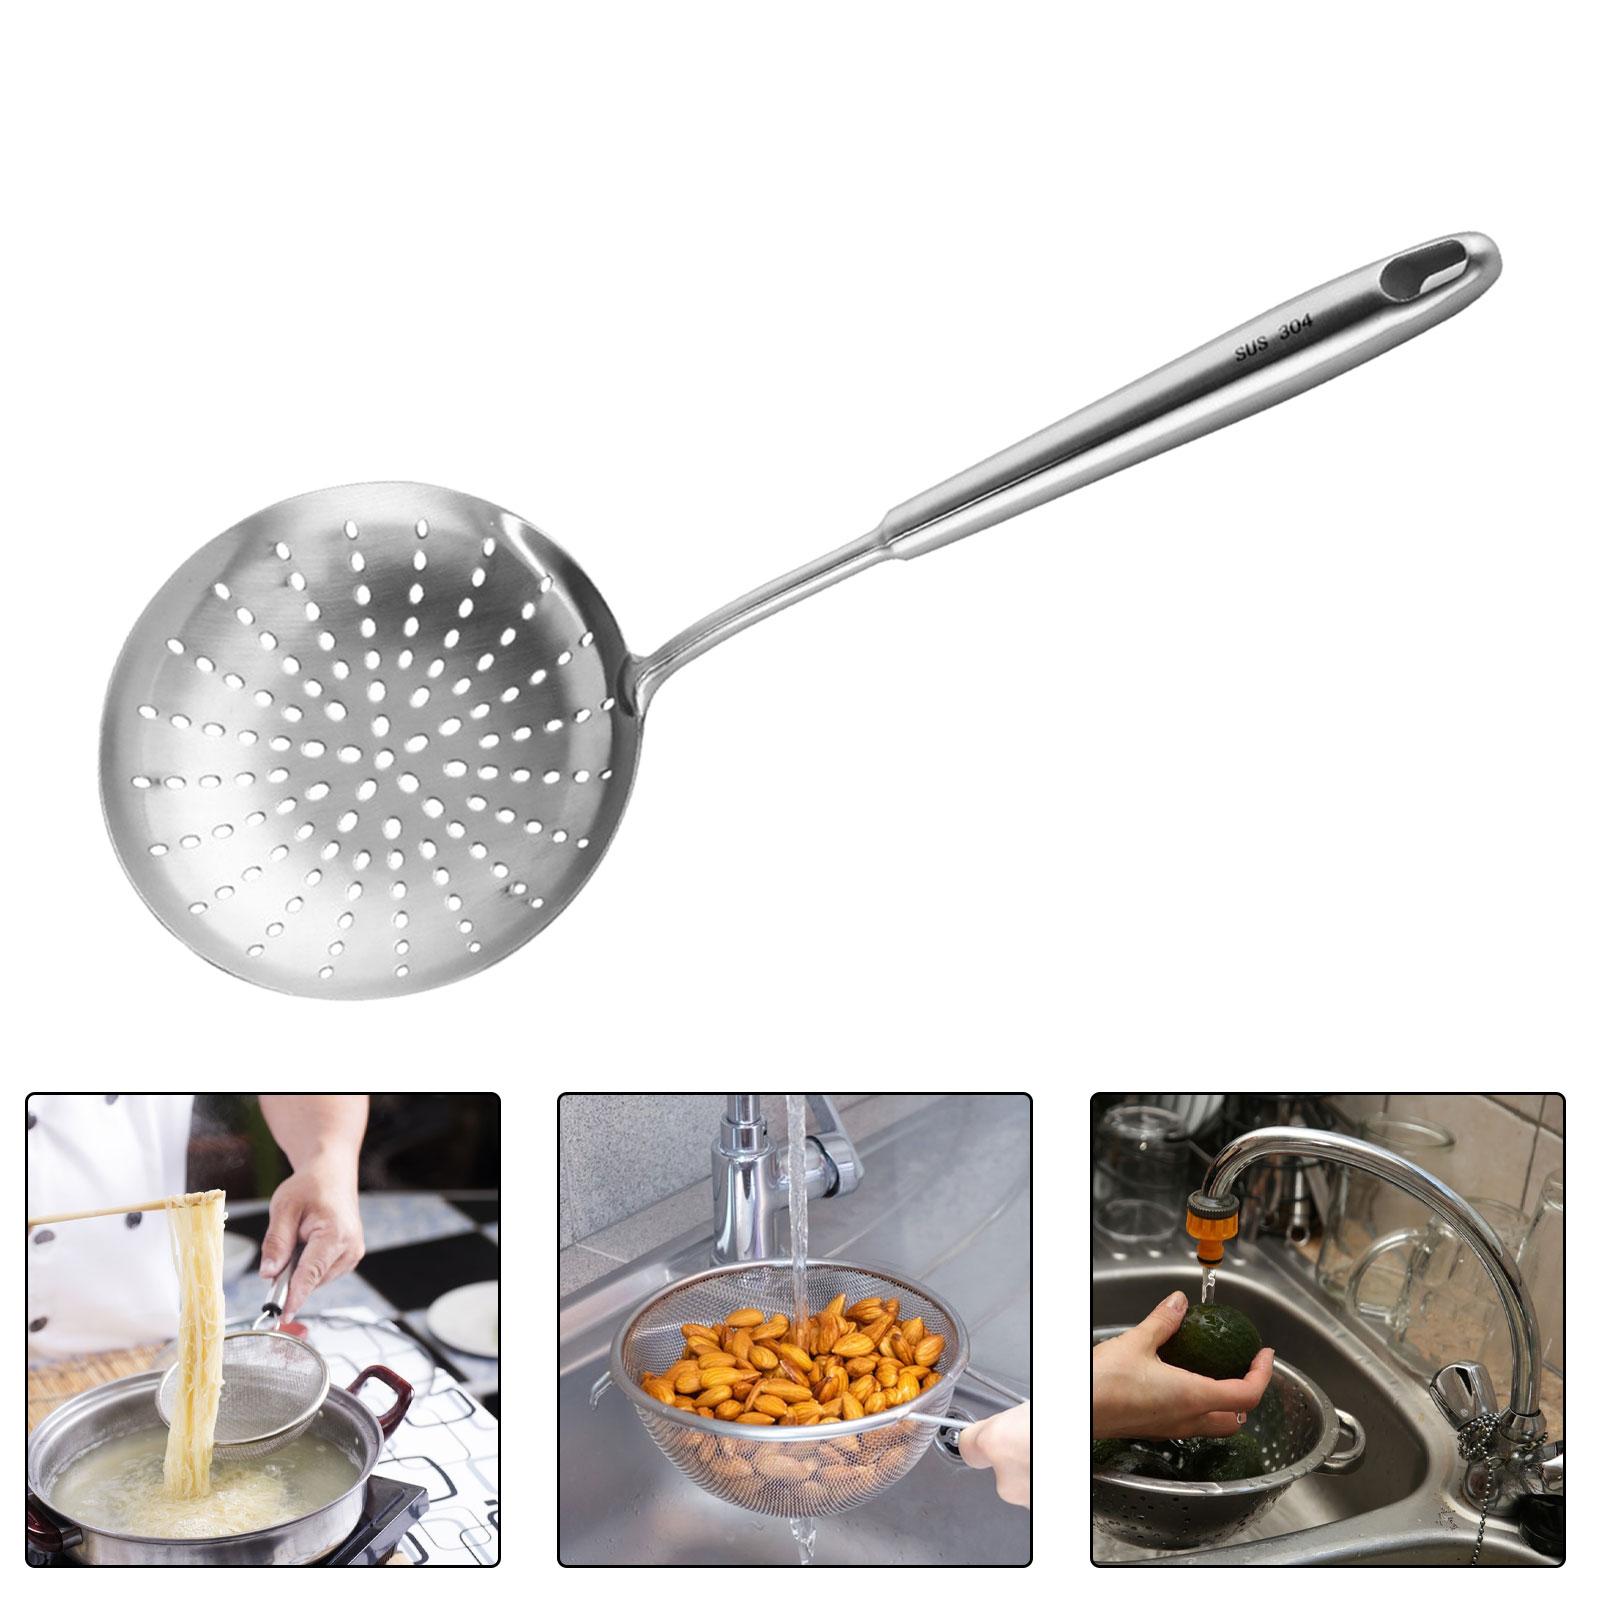 Skimmer Slotted Spoon Stainless Steel Deep Frying Skimmer Spoon for Scooping - image 2 of 9